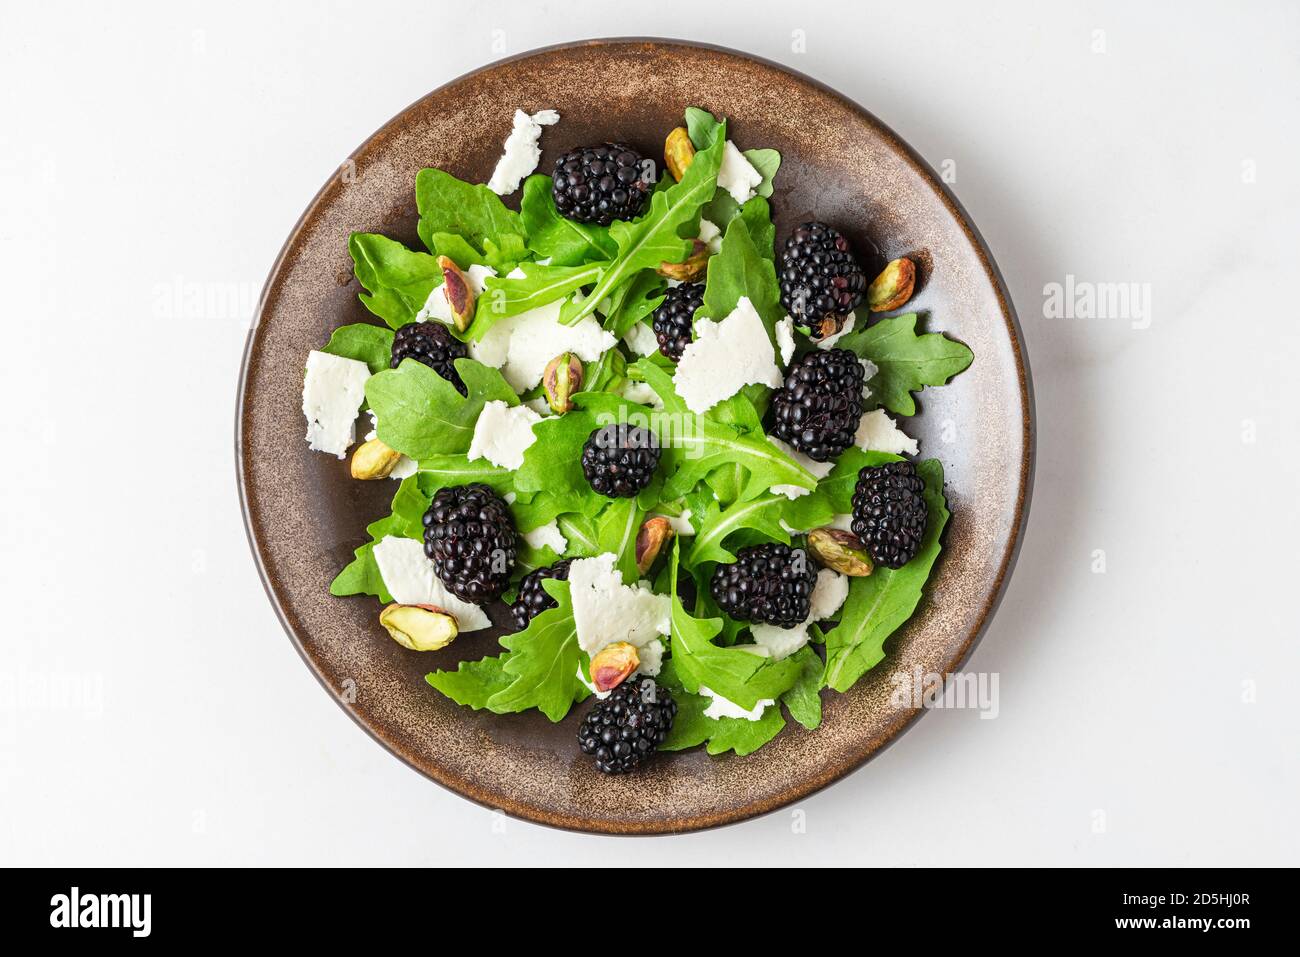 Fresh salad with arugula, goat cheese, blackberries and pistachios in a plate on white background. top view. healthy diet food Stock Photo